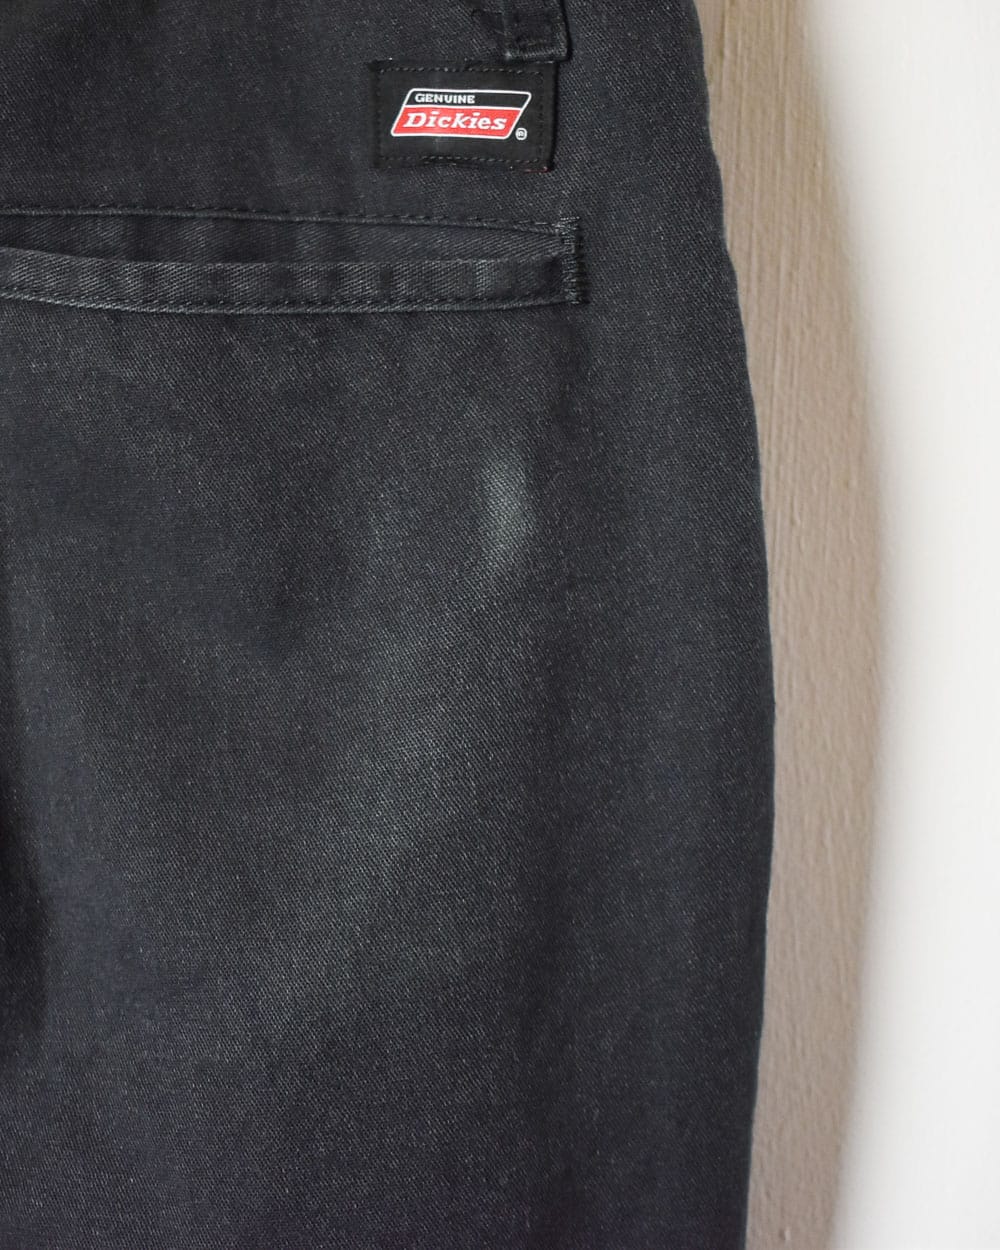 Black Dickies Relaxed Fit Cargo Trousers - W41 L30